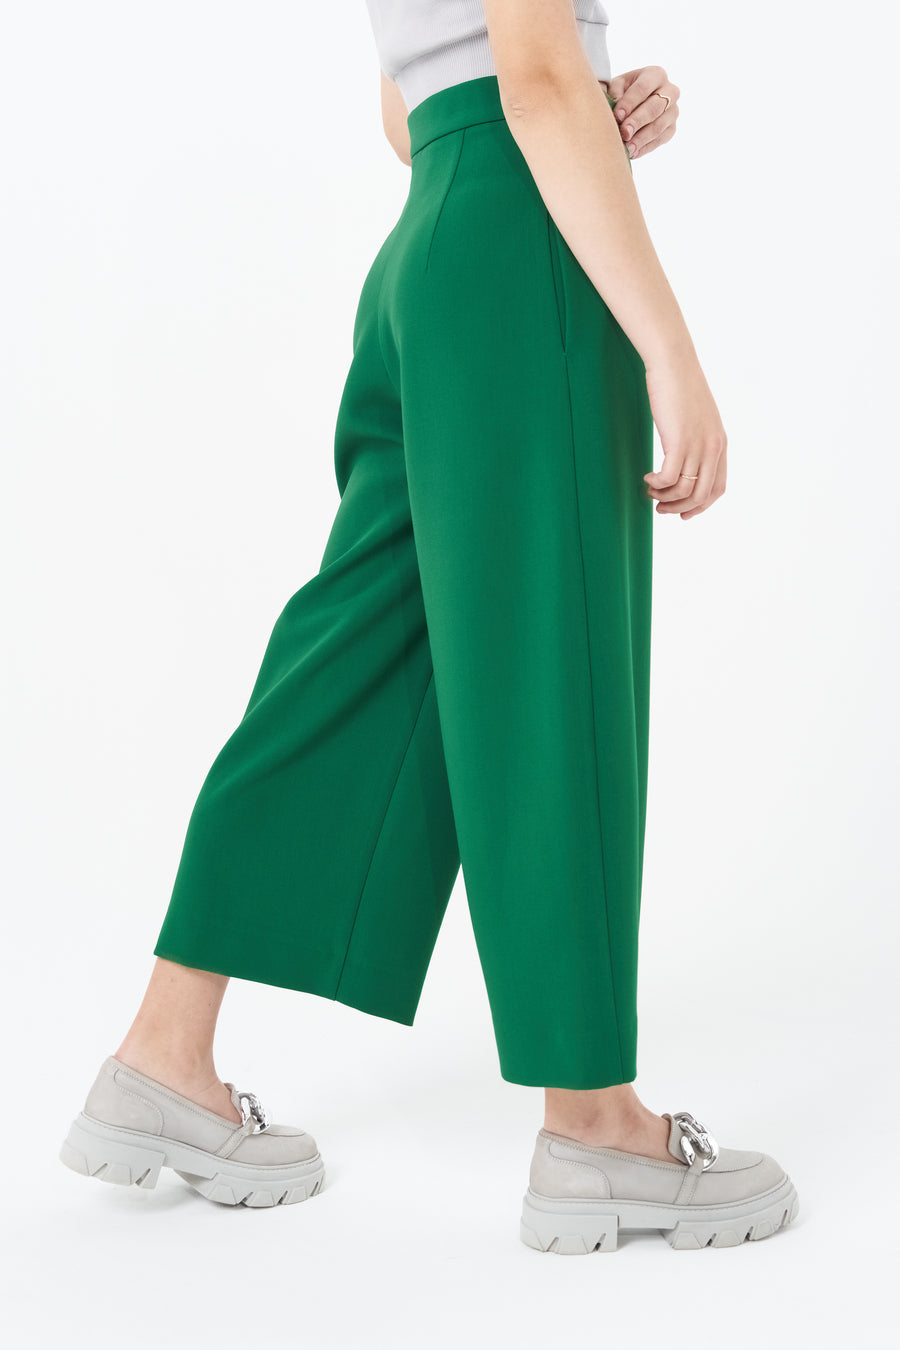 MARION GREEN TROUSERS